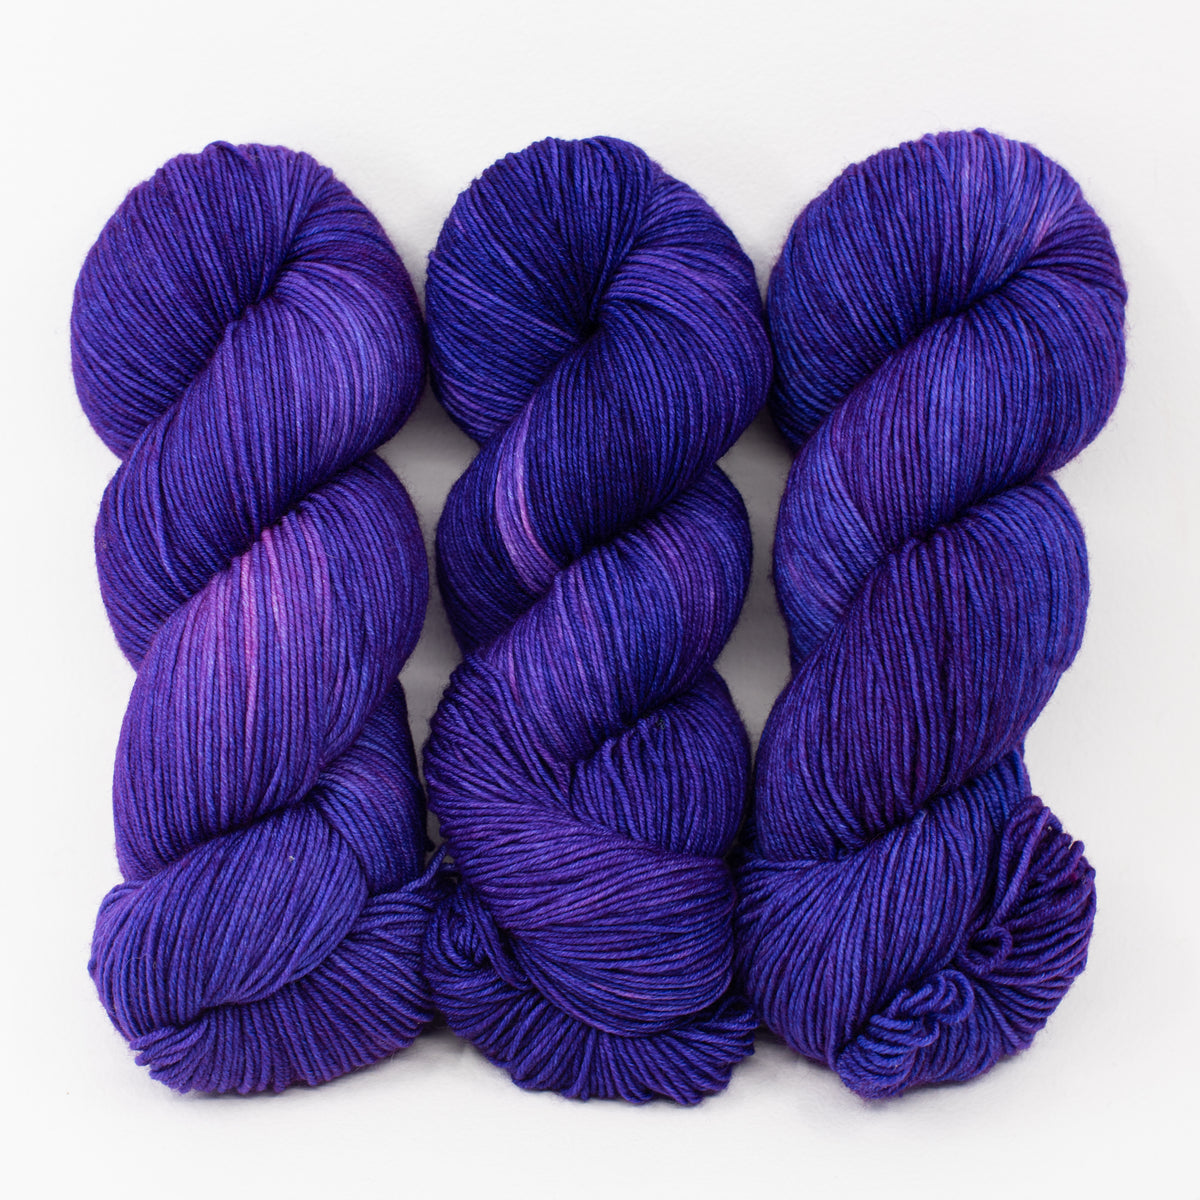 Purple Sequins - Revival Fingering - Dyed Stock